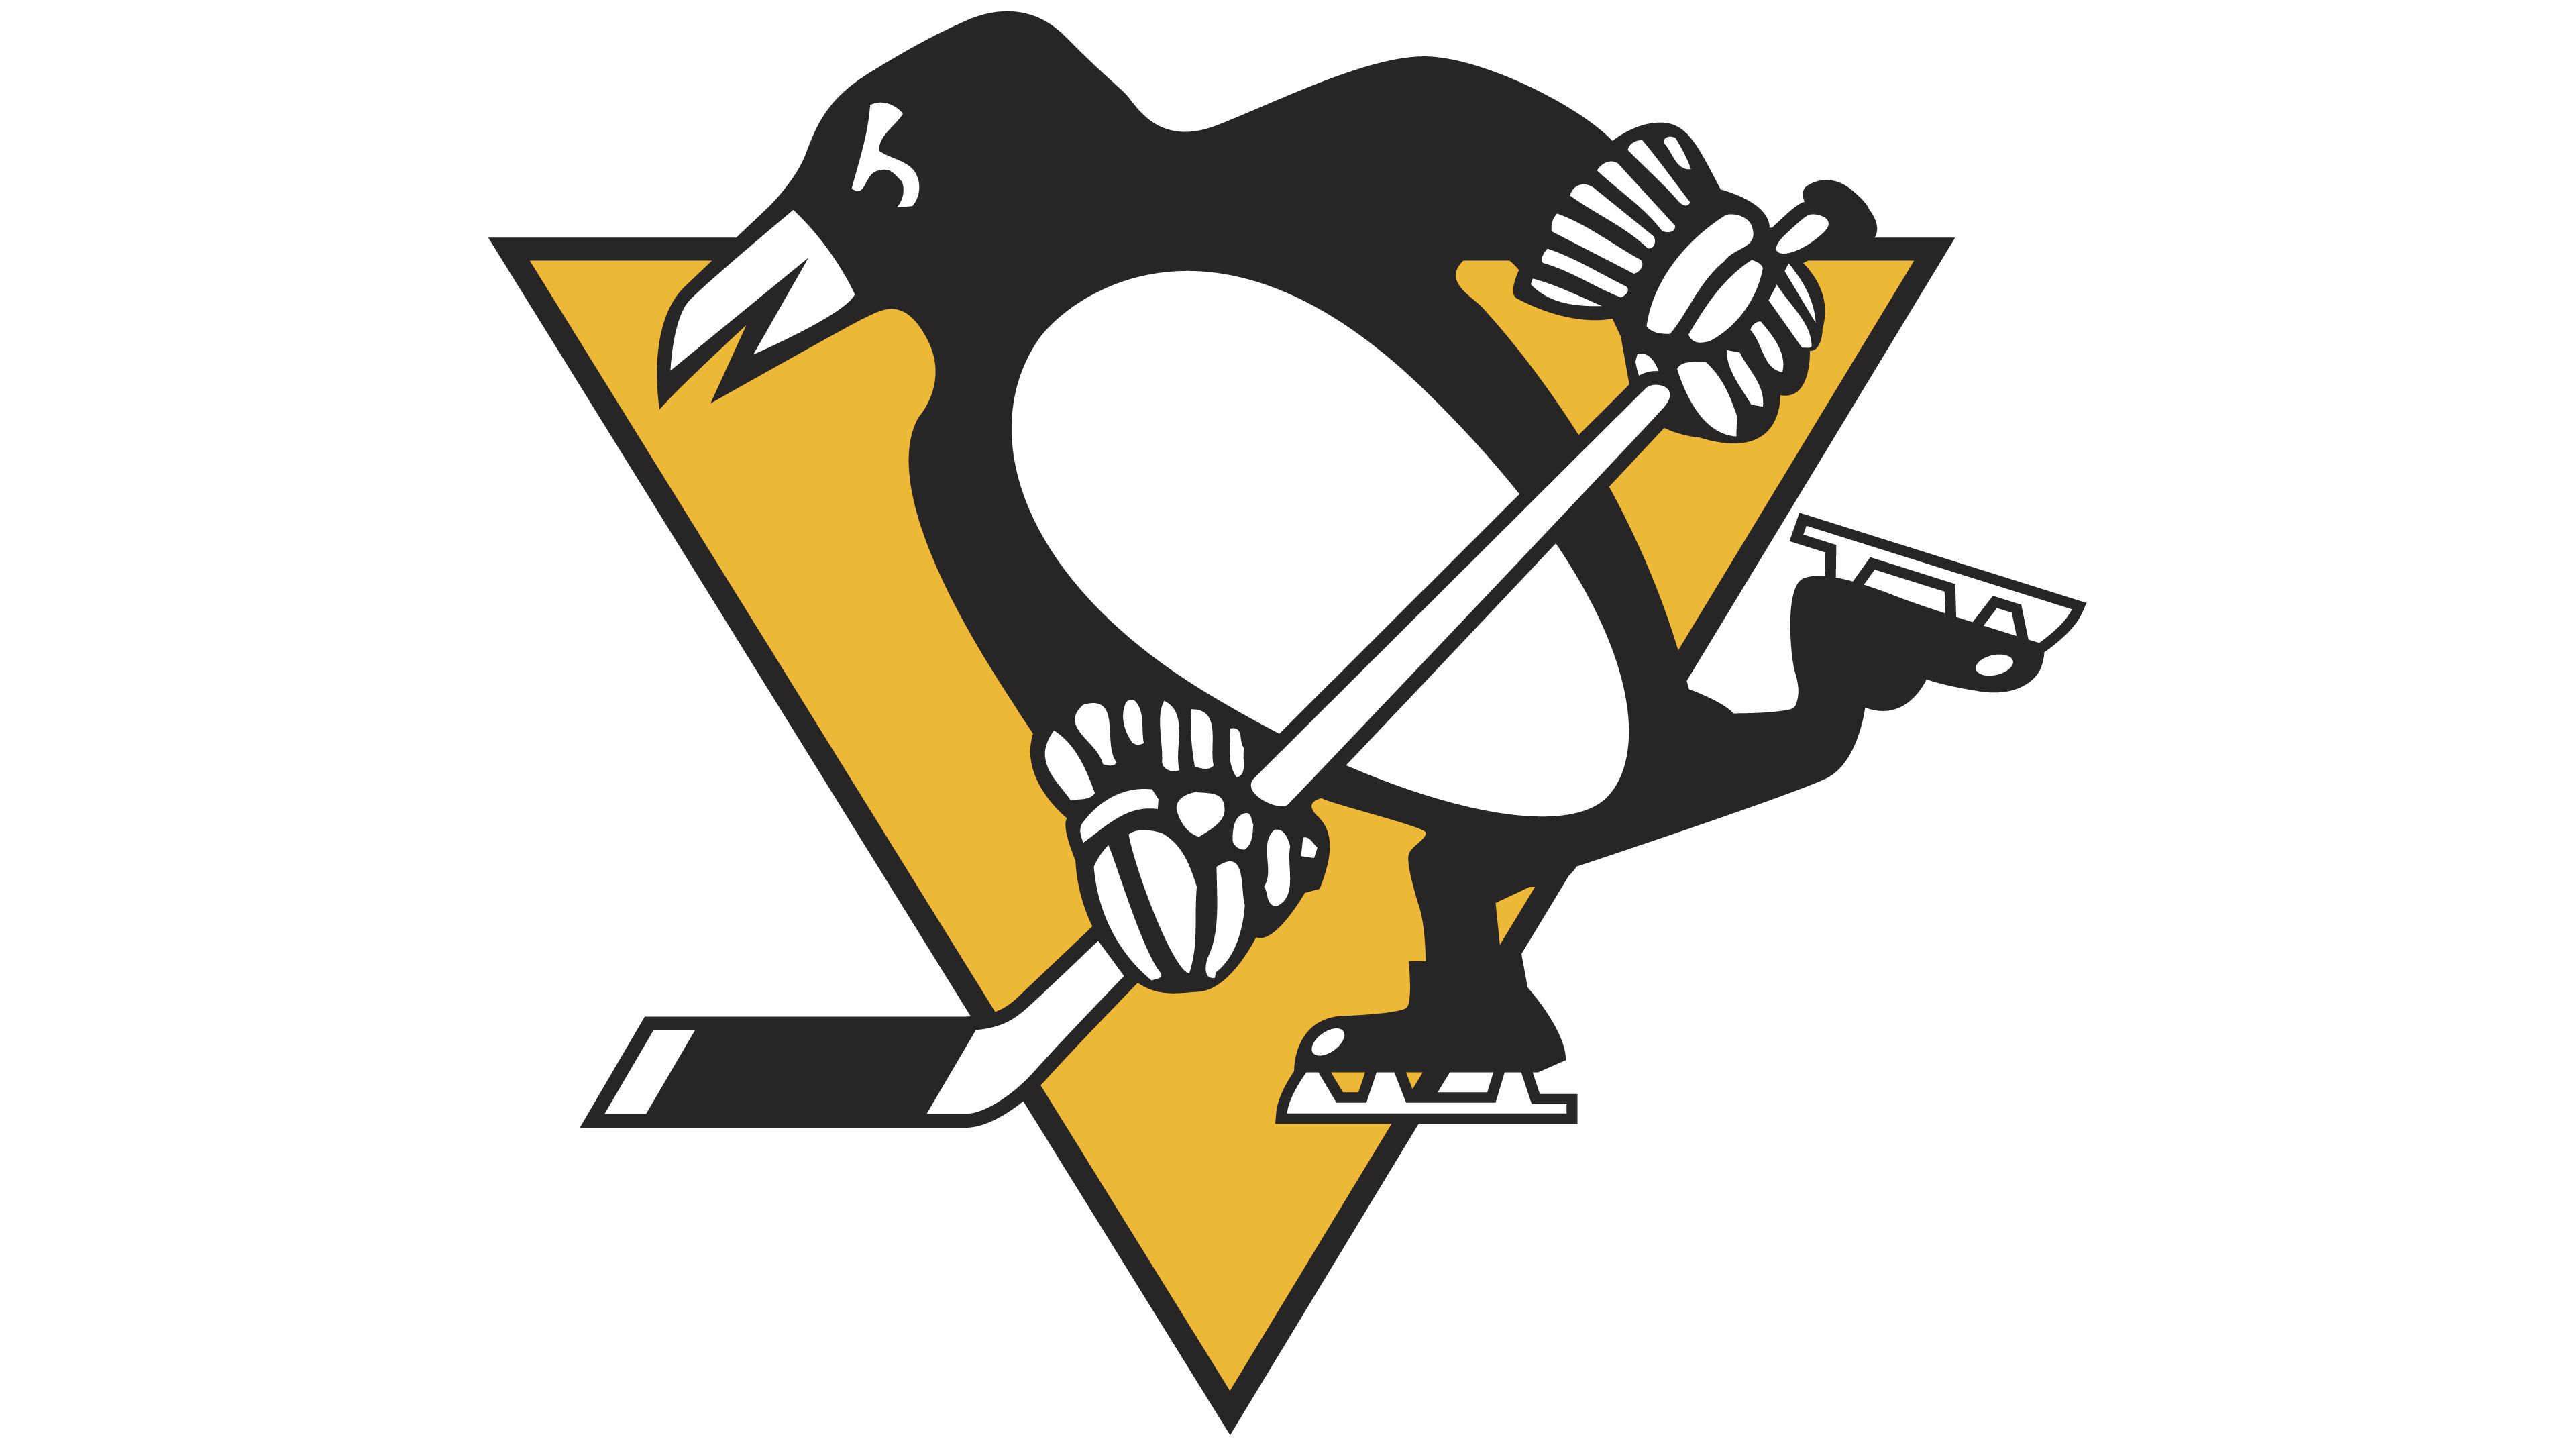 Penguins Logo - Pittsburgh Penguins logo - Interesting History of the Team Name and ...